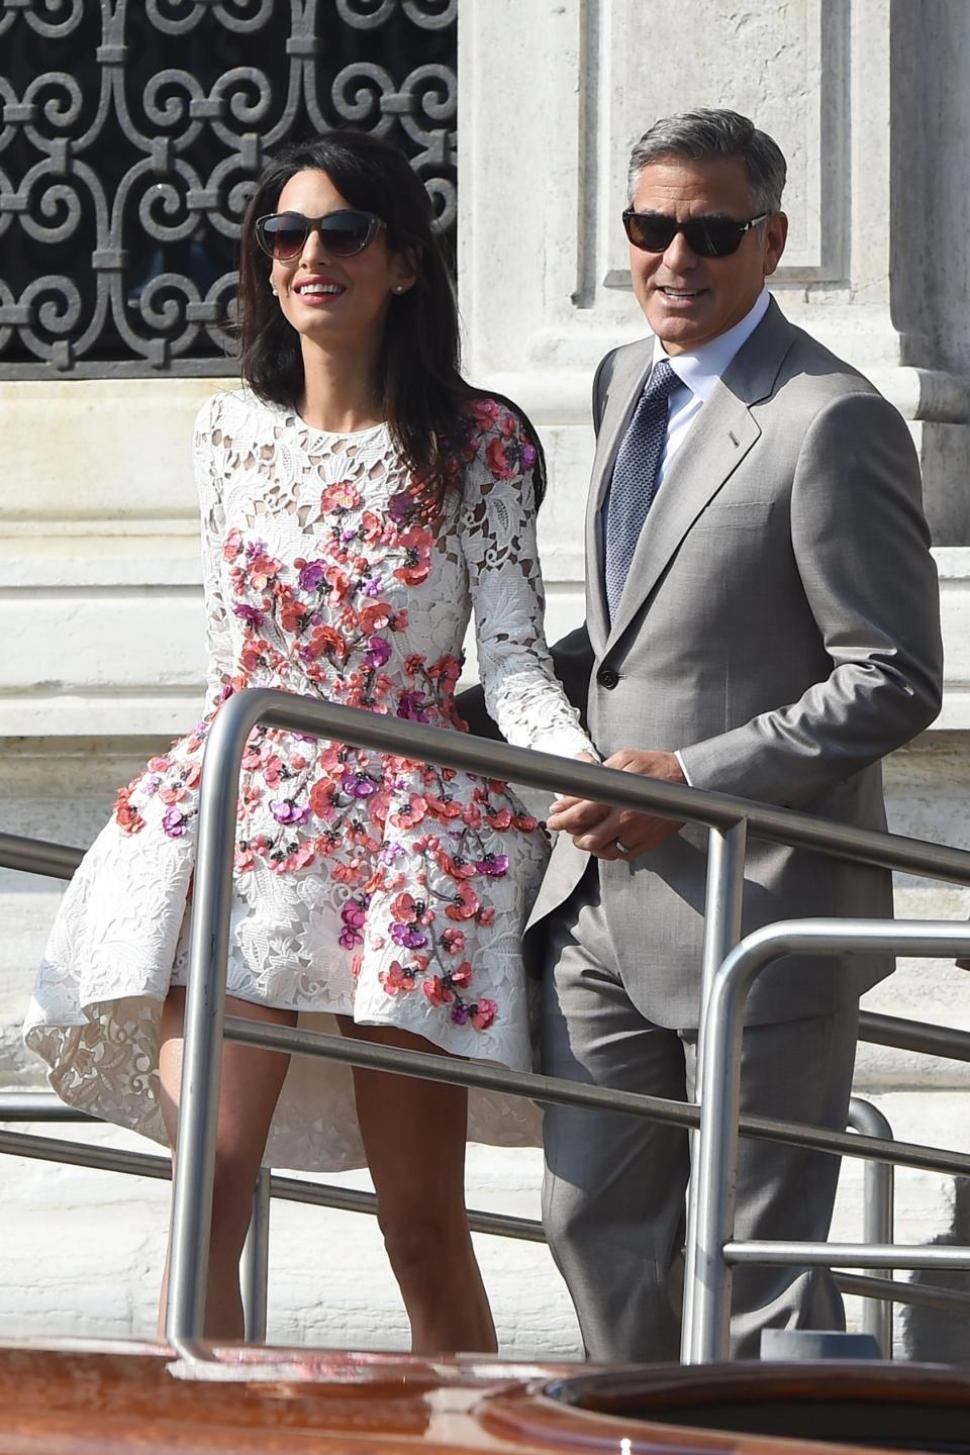 Fans are getting a little crazy over the possibility of George Clooney and Amal Alamuddin having a baby.